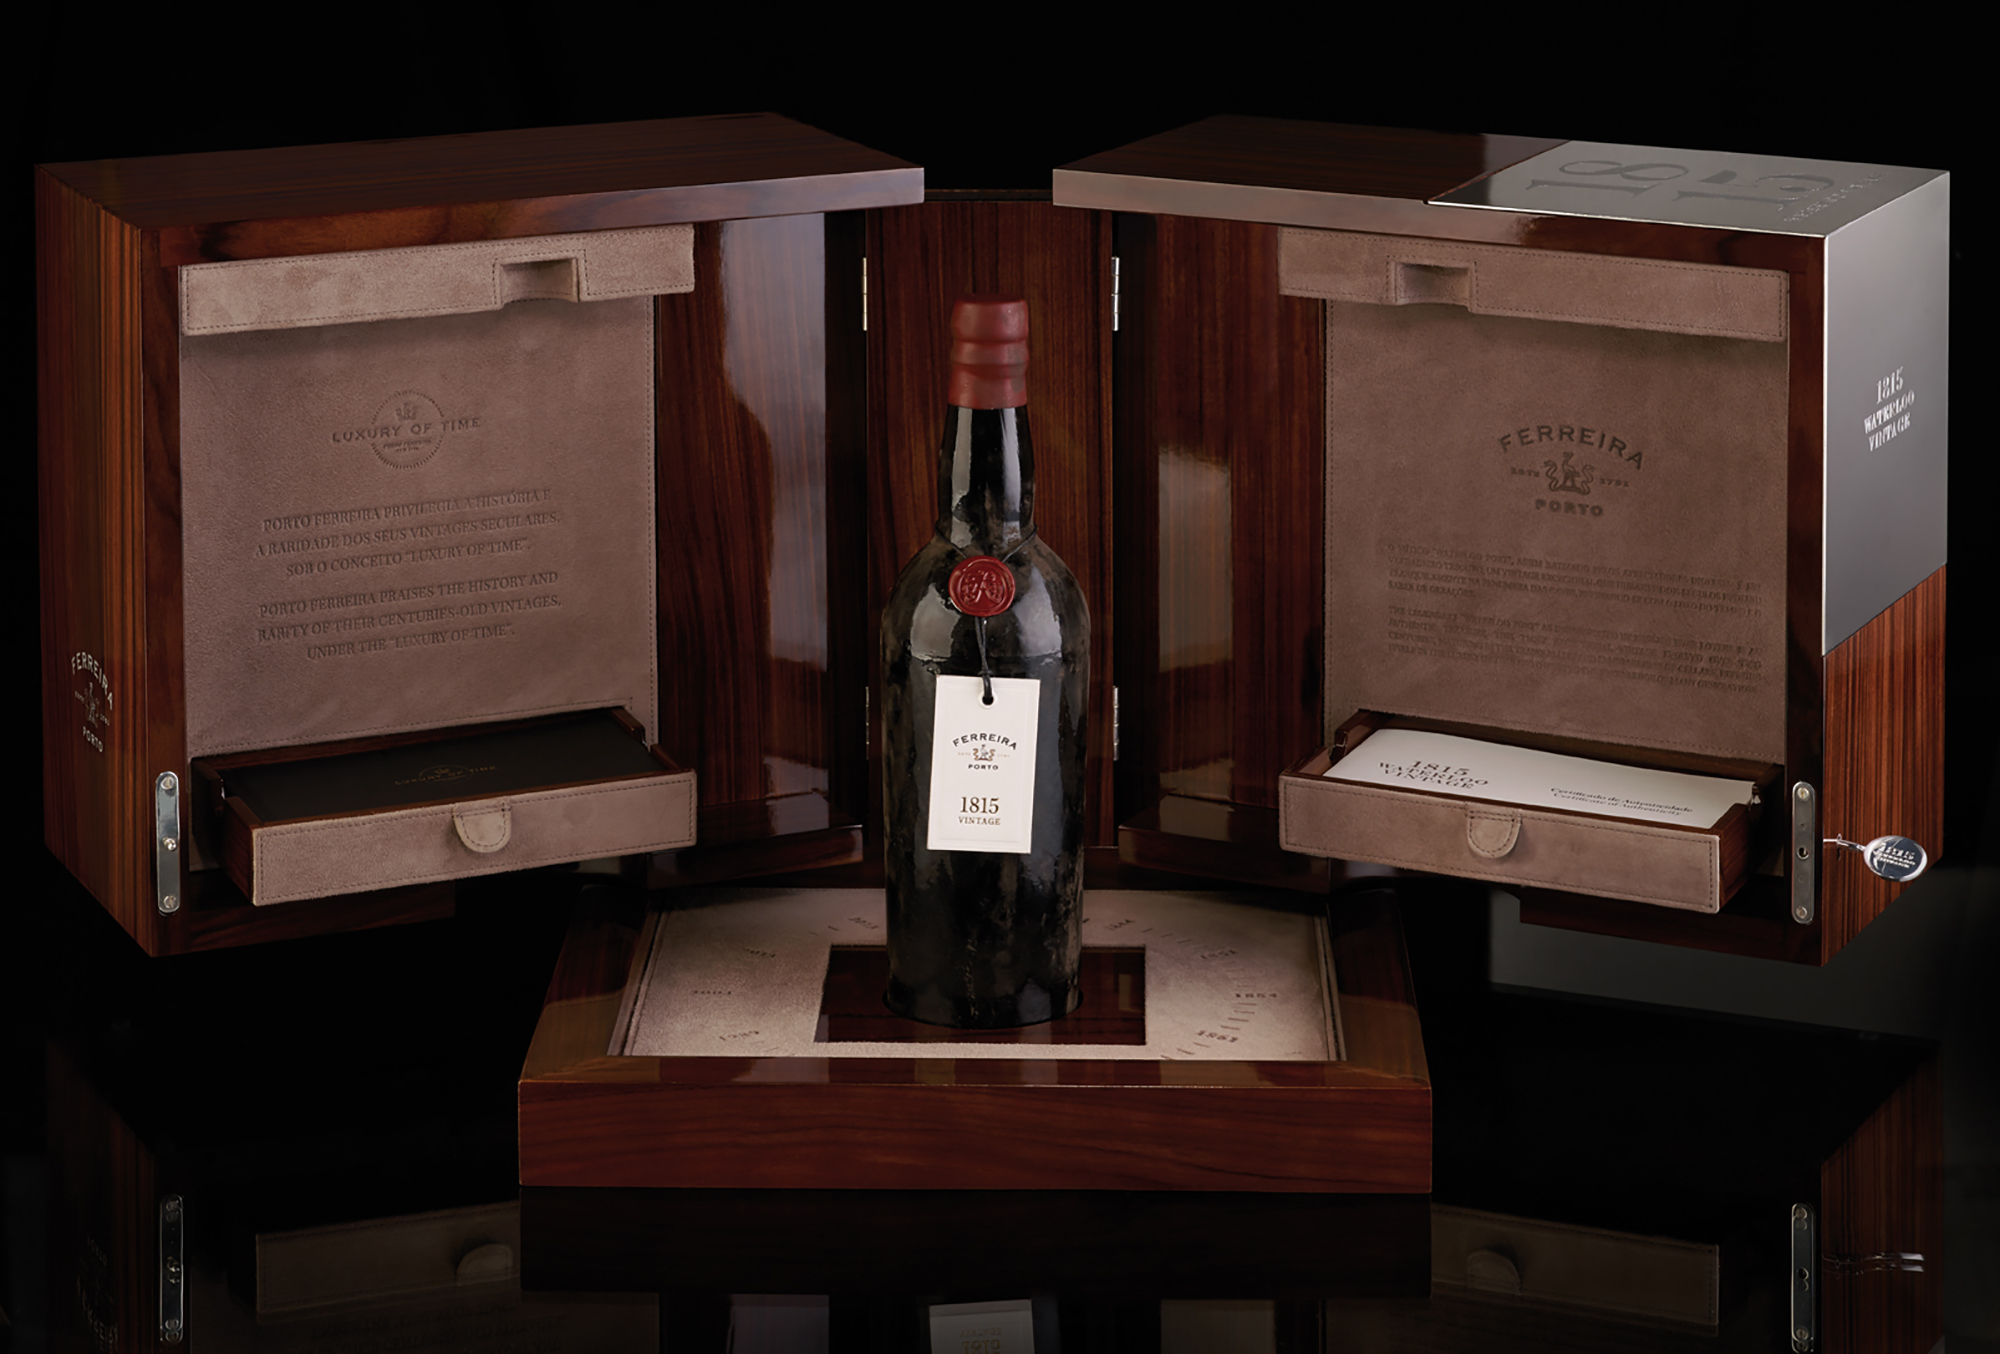 The Porto Ferreira’s Solidarity Packaging Created by Omdesign